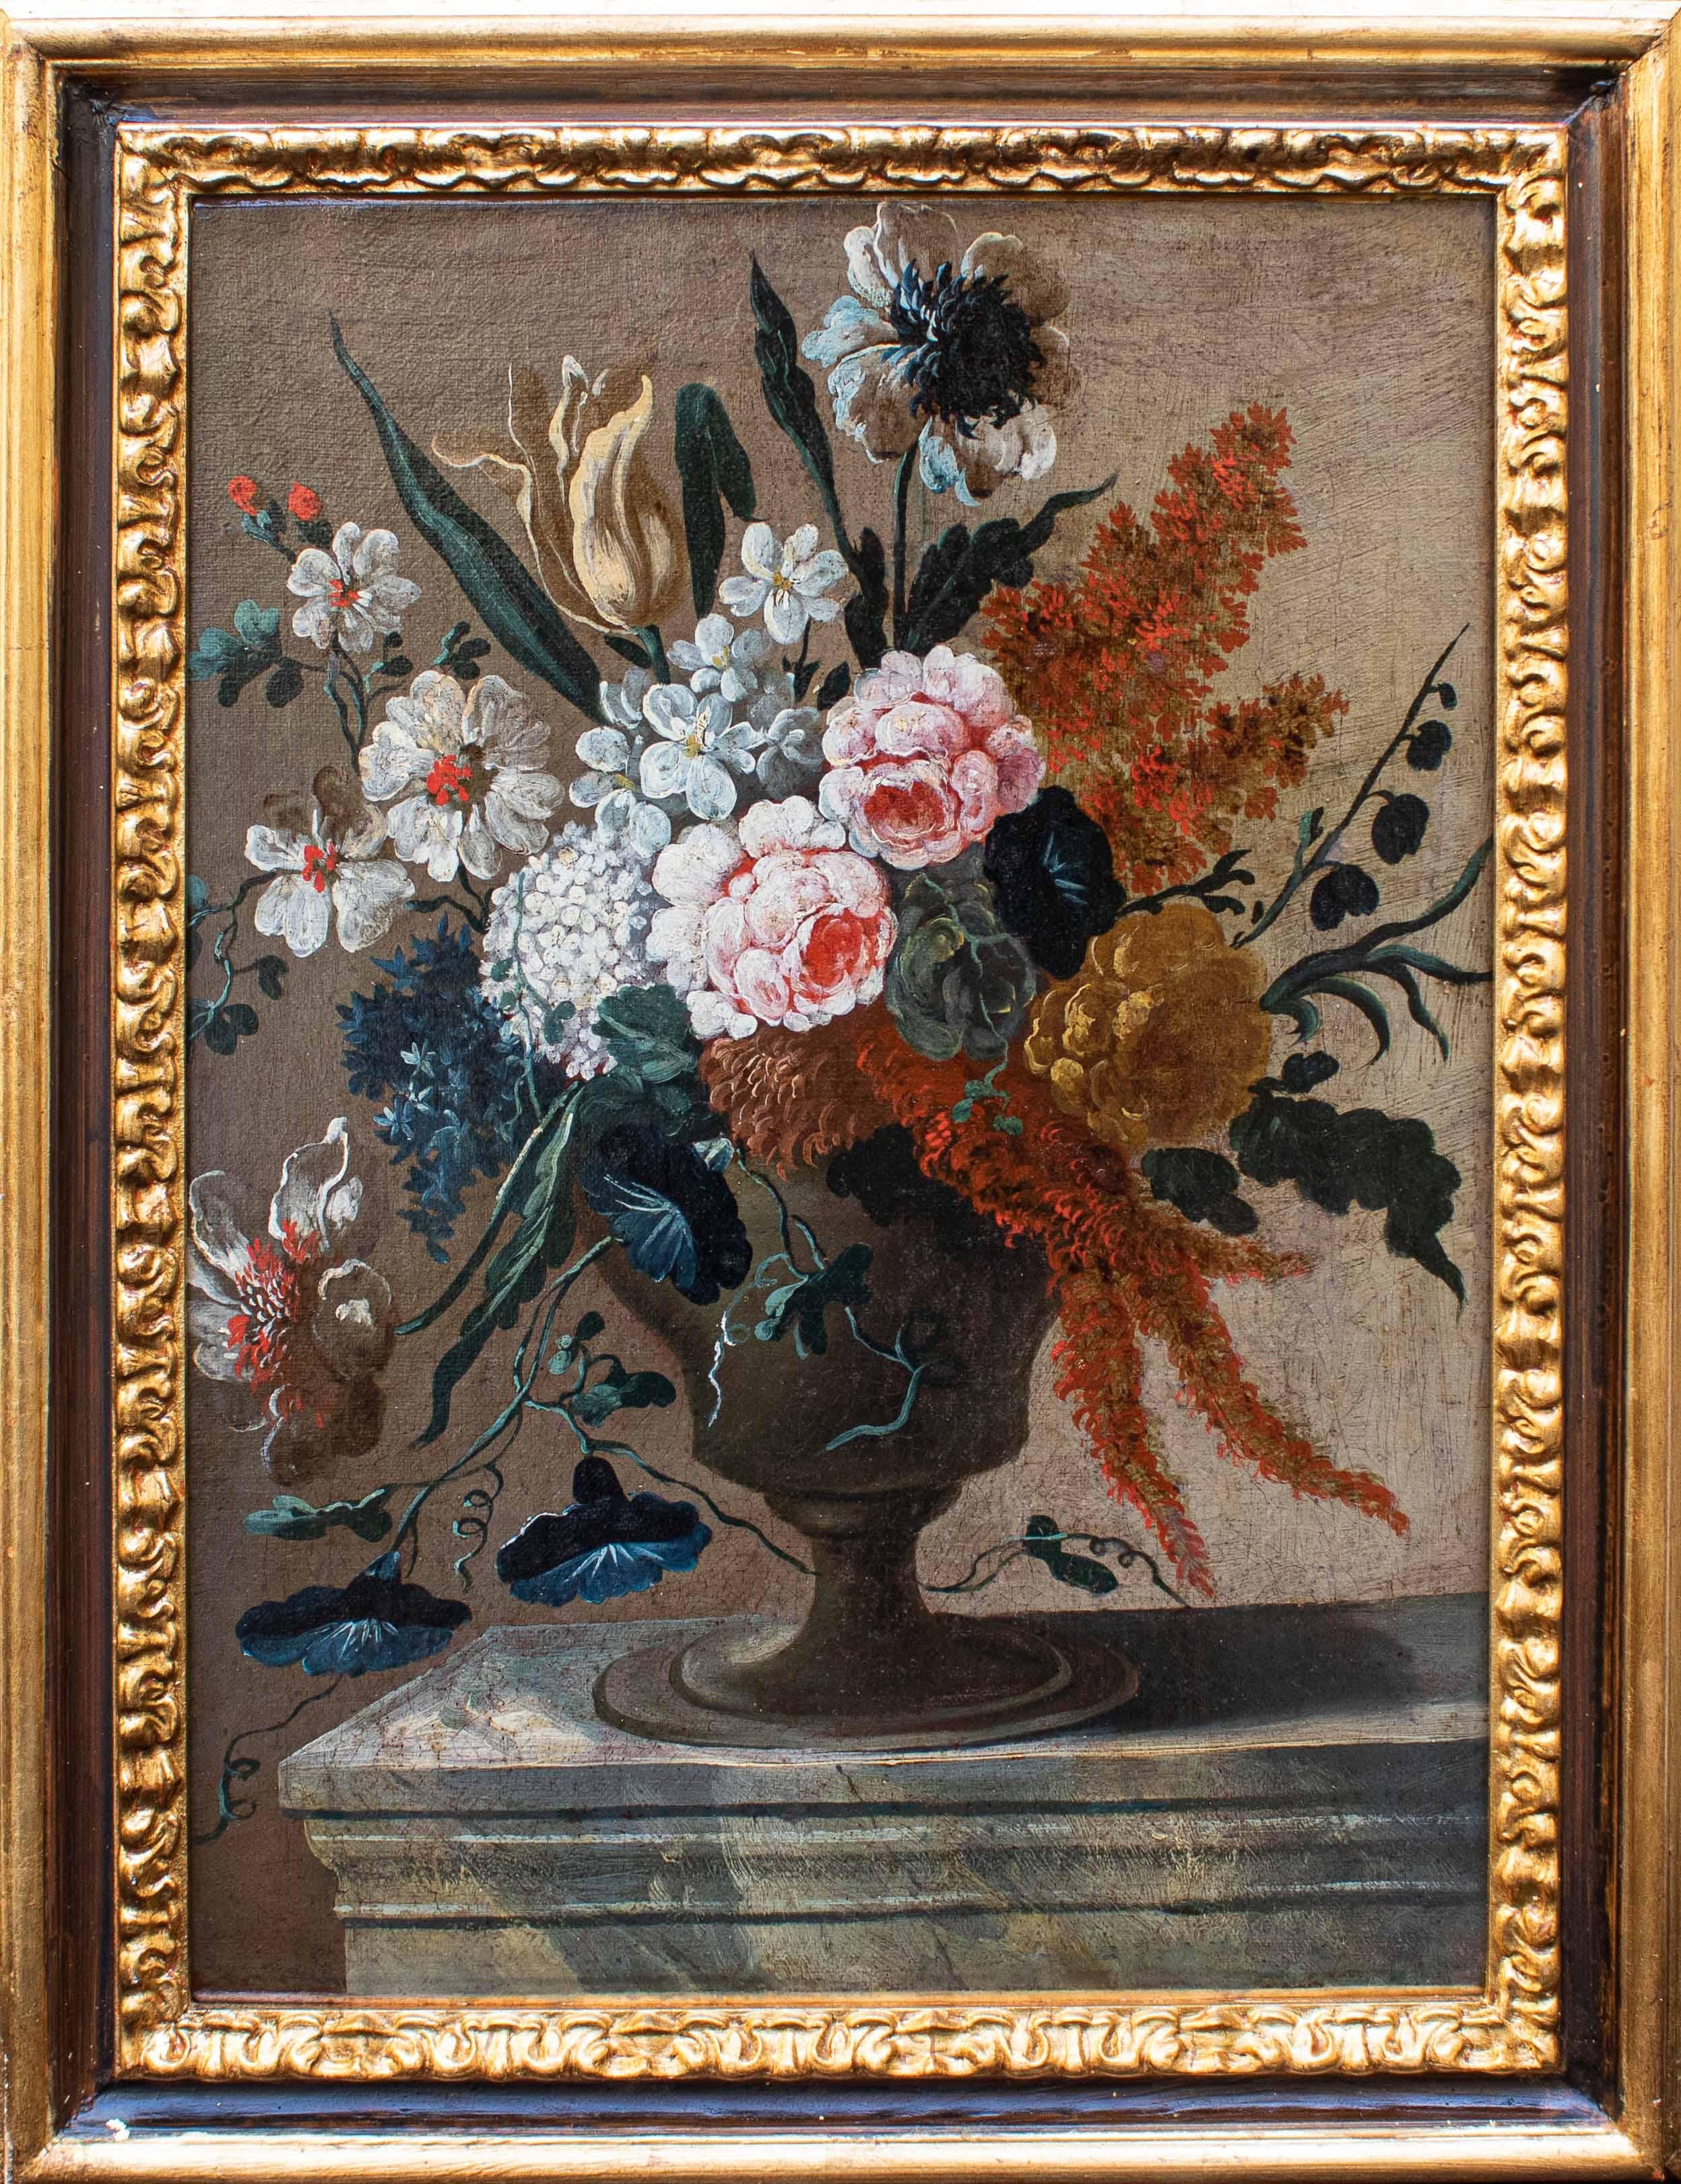 Italian Second Half of 17th Century Pair of Still Lifes with Flowers Oil on Canvas